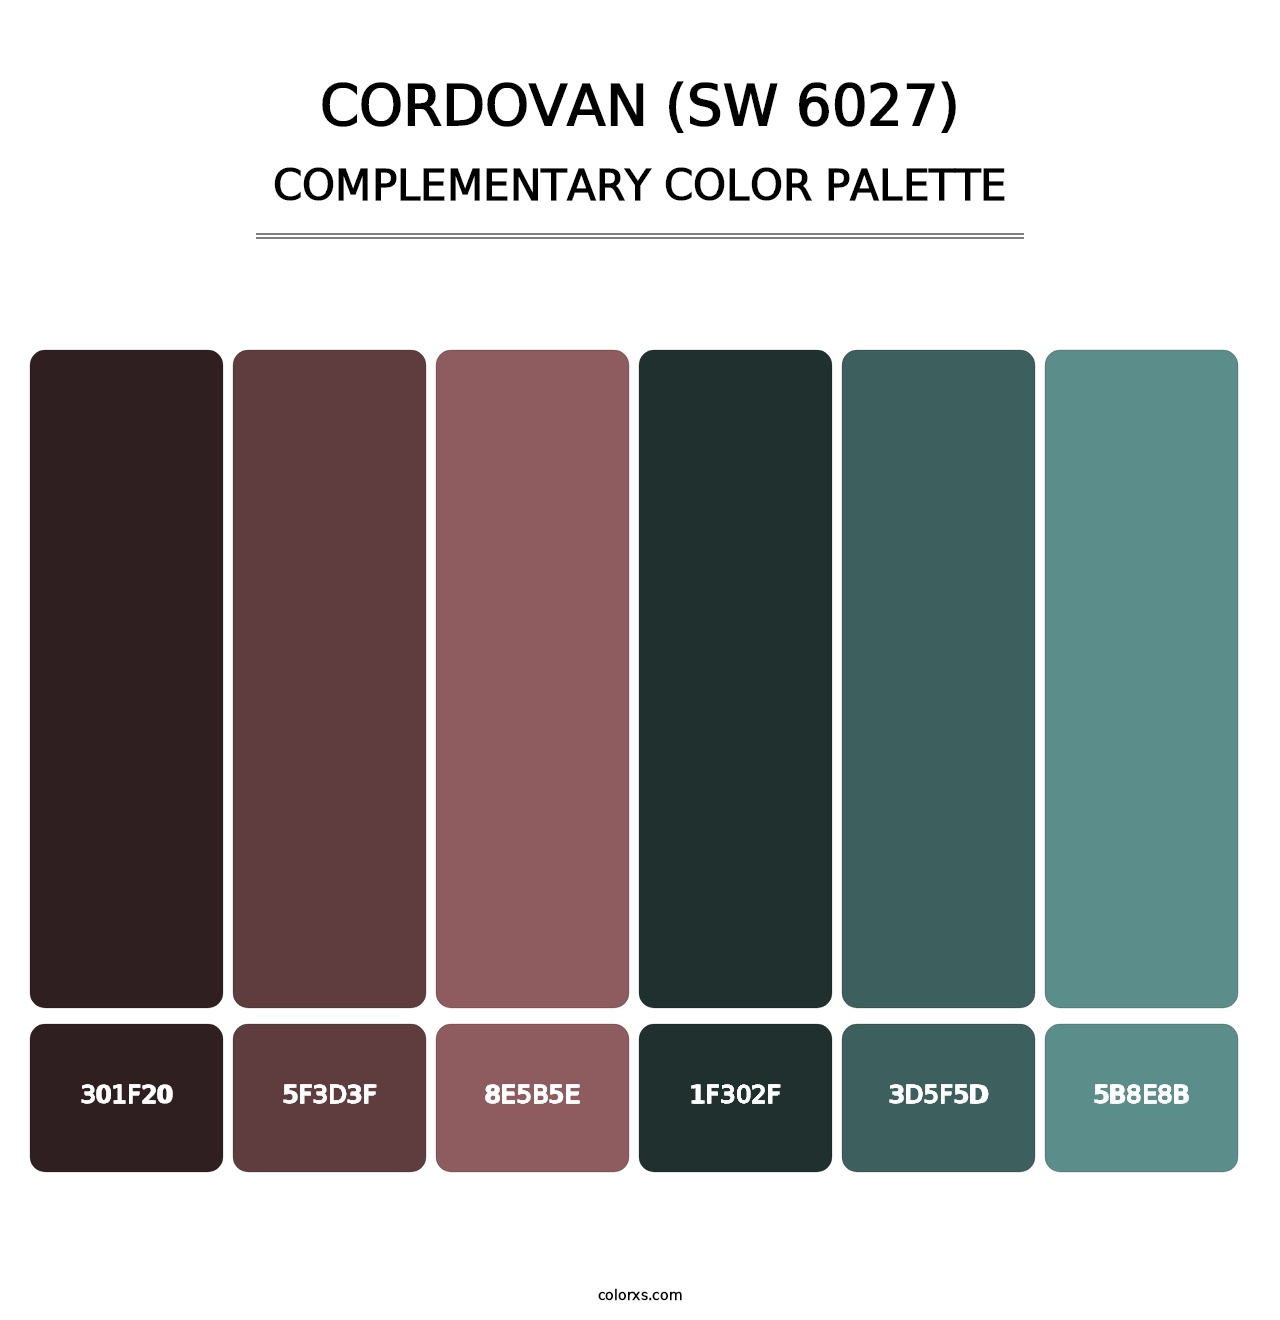 Cordovan (SW 6027) - Complementary Color Palette